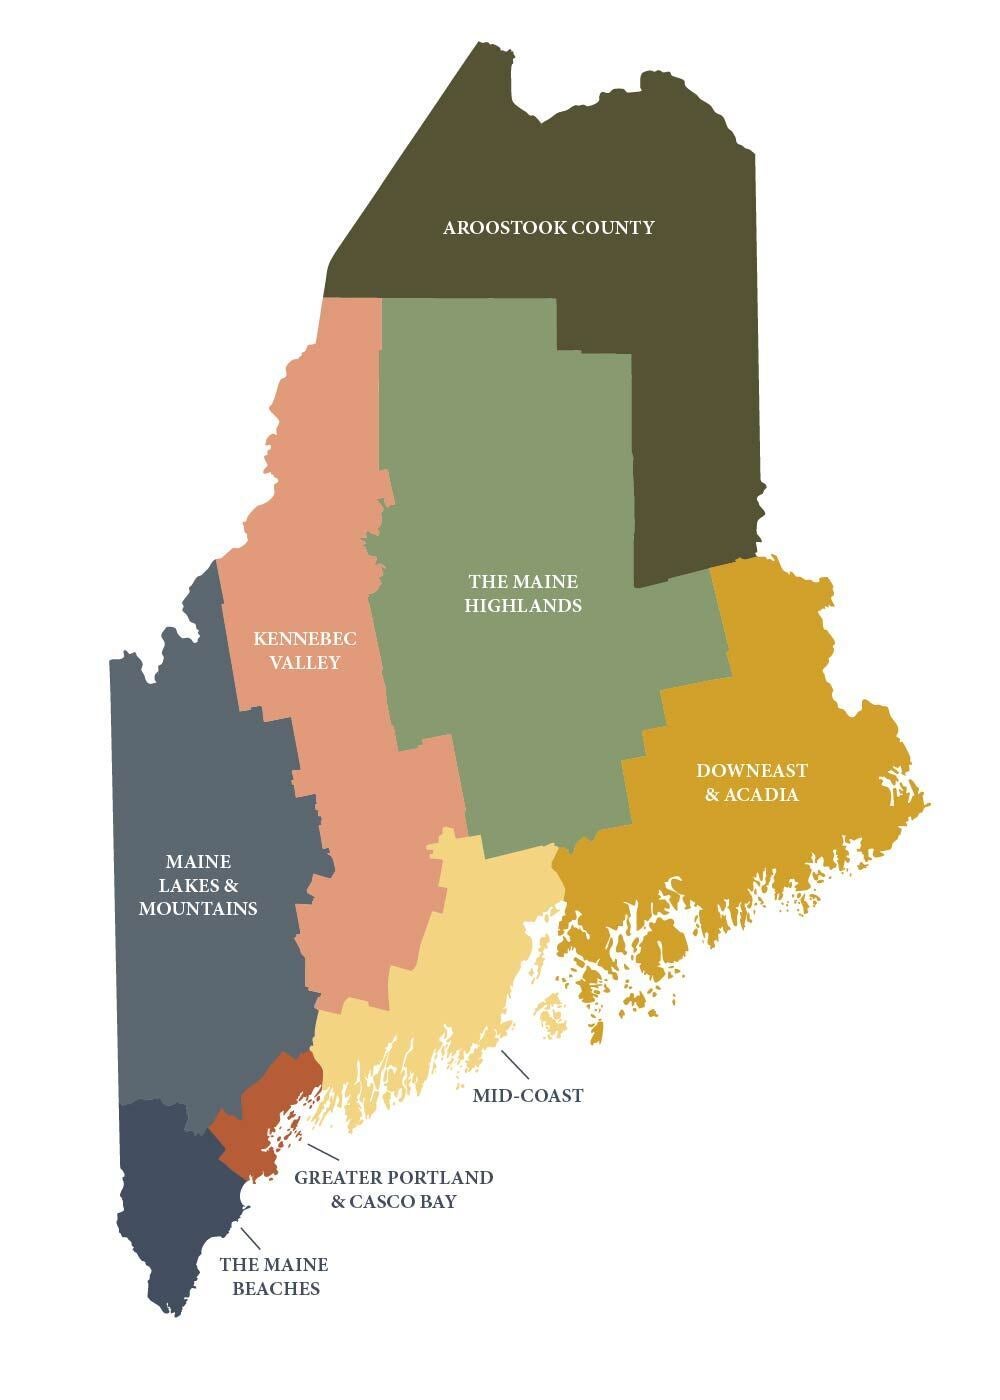 Map of all 8 regions of Maine rendered in earthy tones: pine green, light greyish green, mustard yellow, coral pink, light yellow, terracotta red, charcoal grey and black.